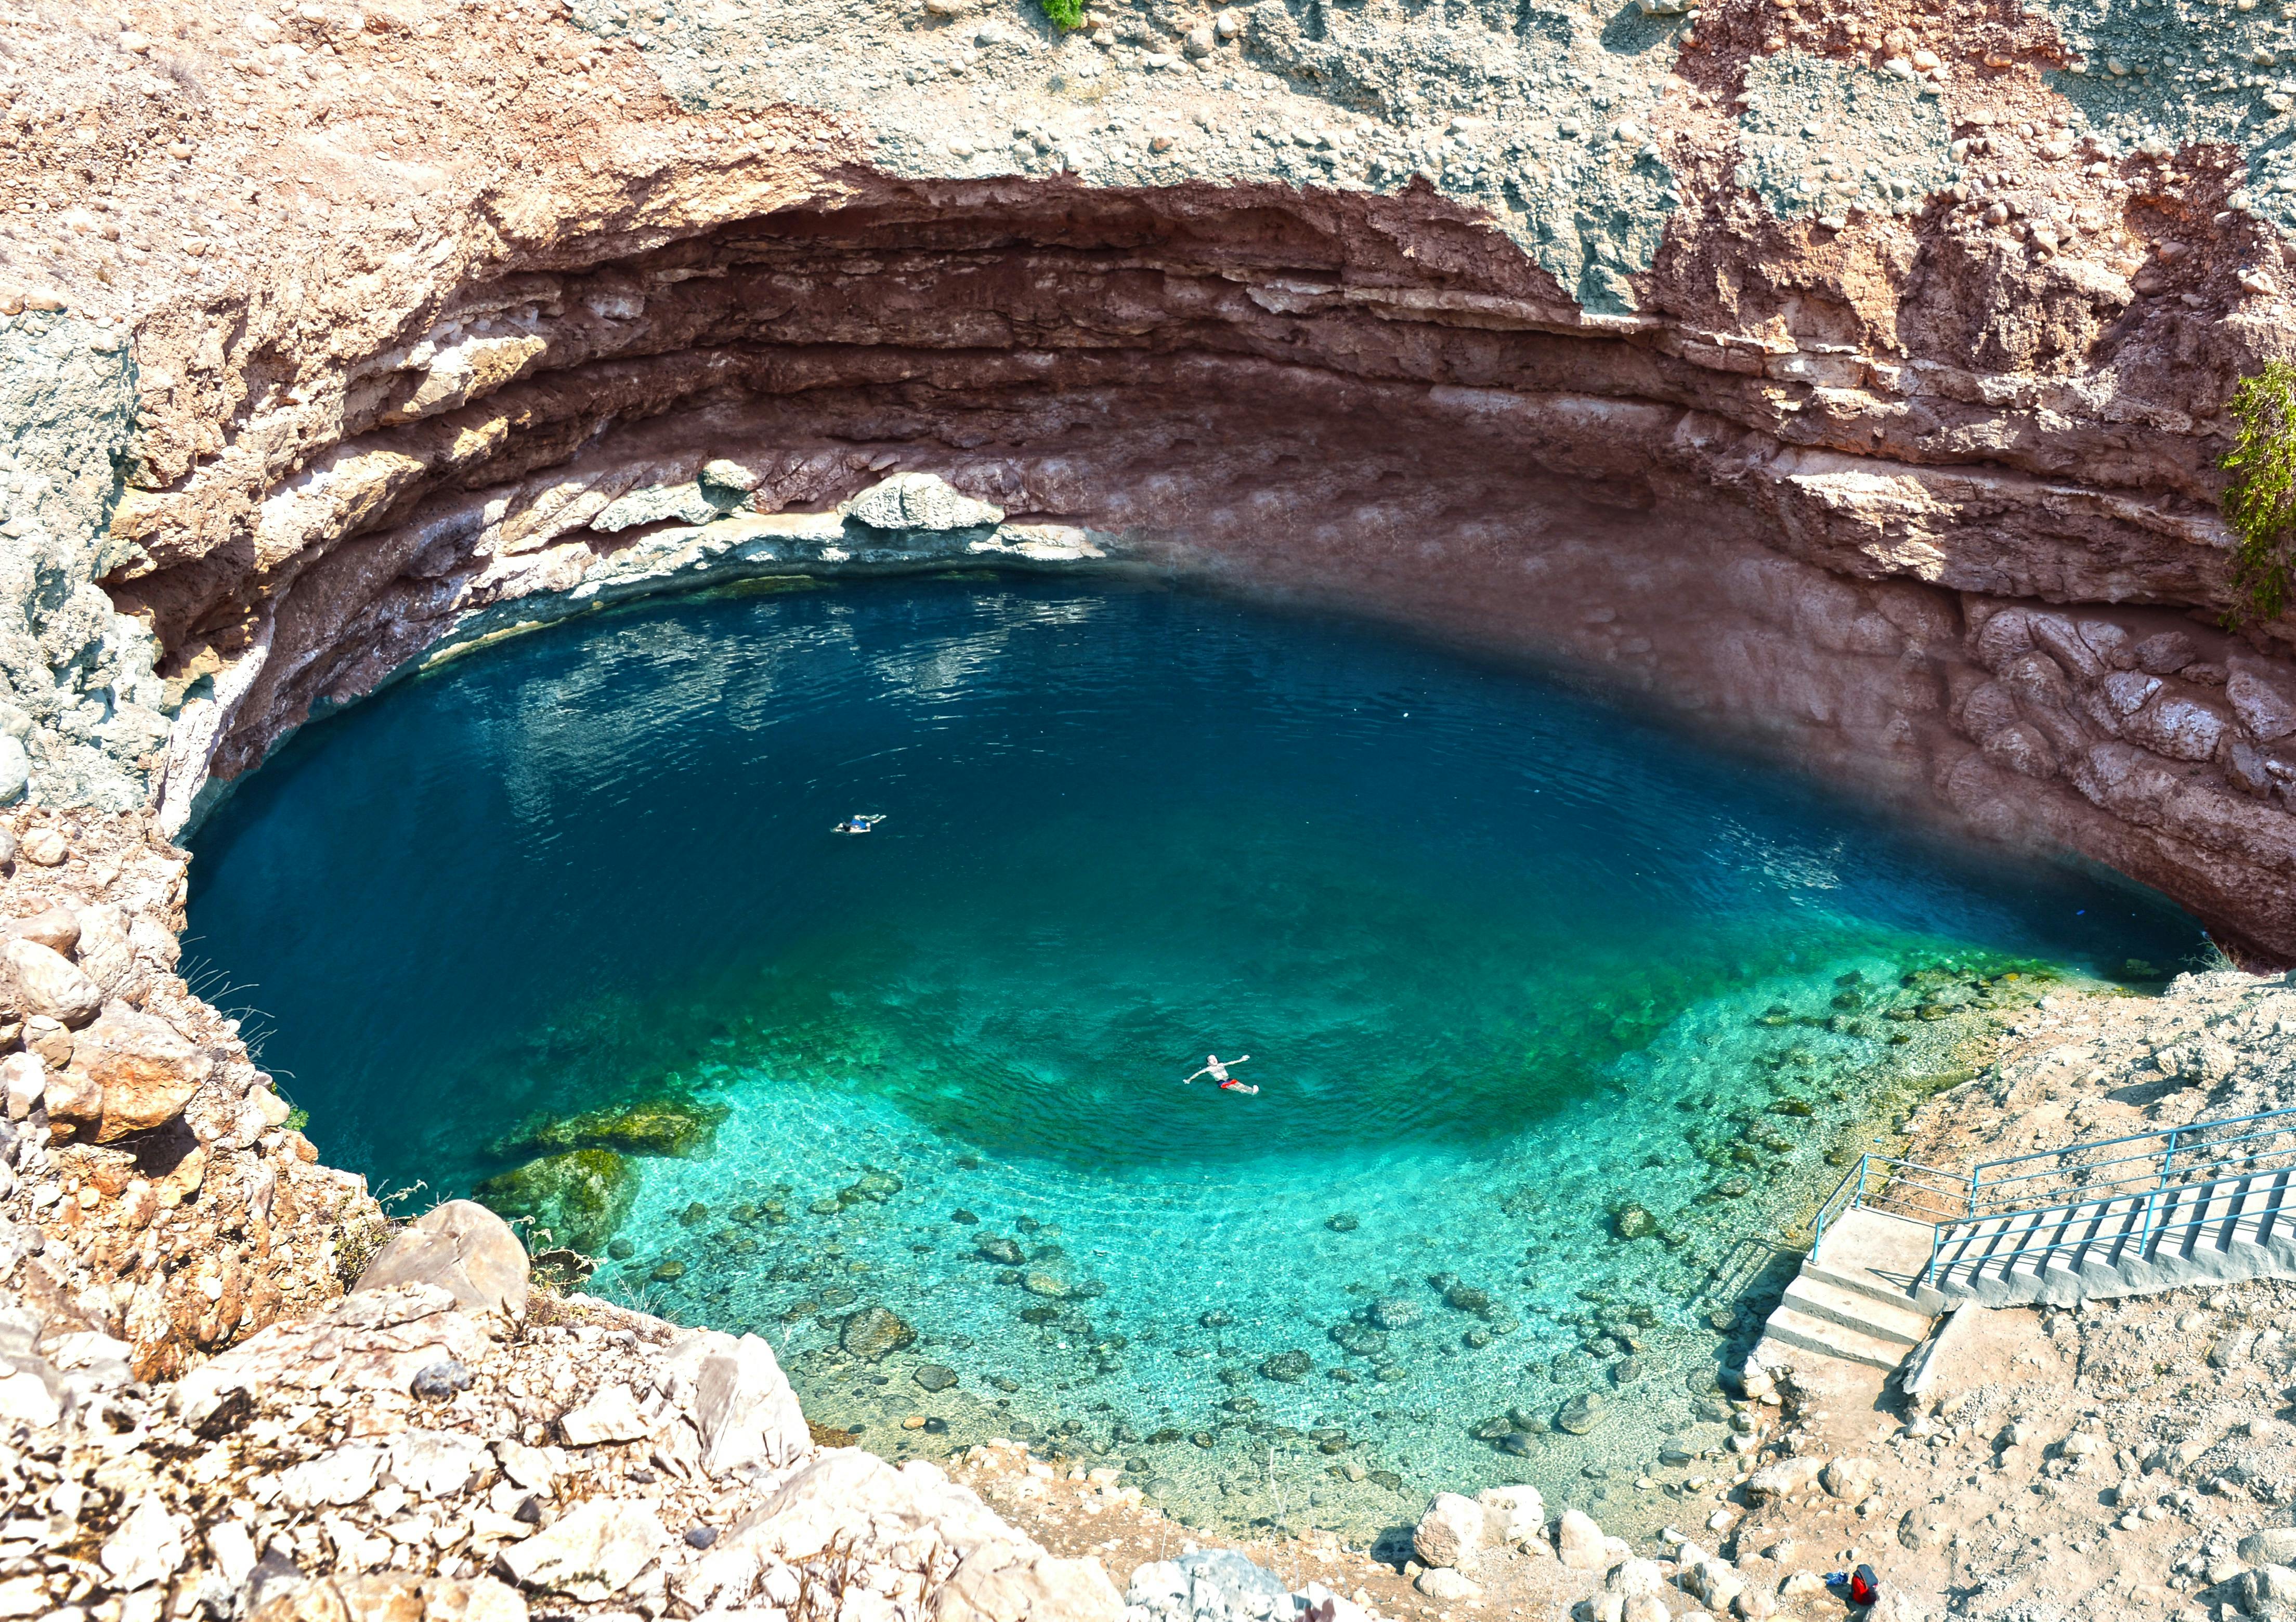 Private tour to Sinkhole and Wadi from Muscat with lunch box